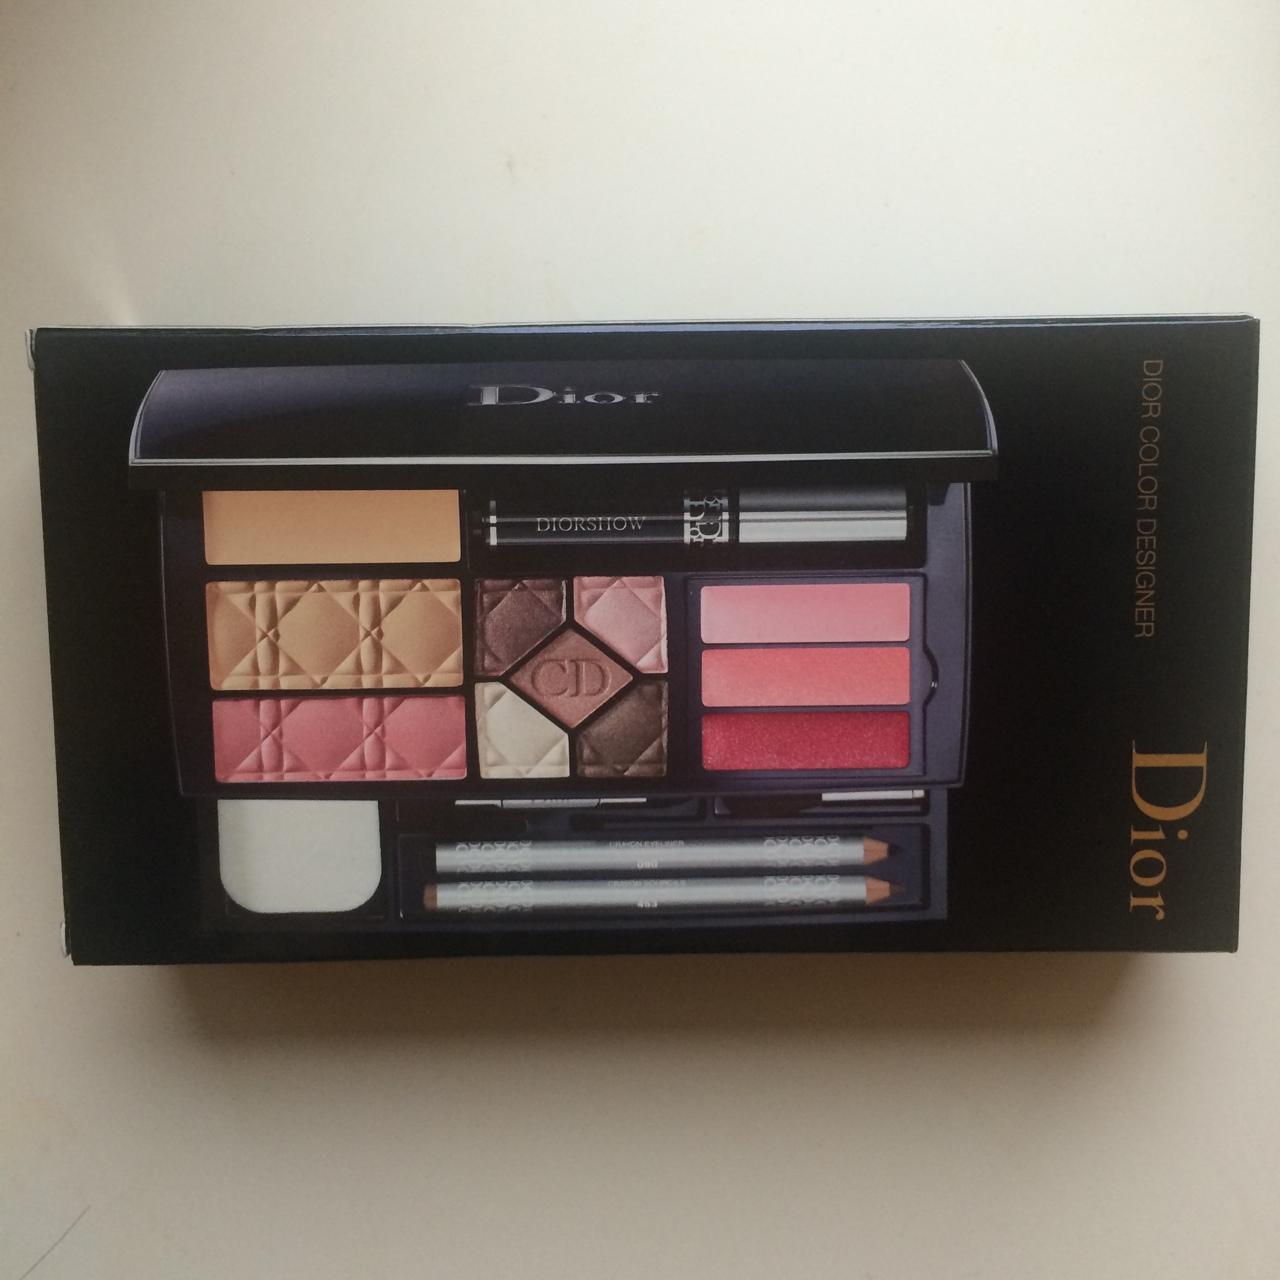 Dior All-in-One Makeup Palette